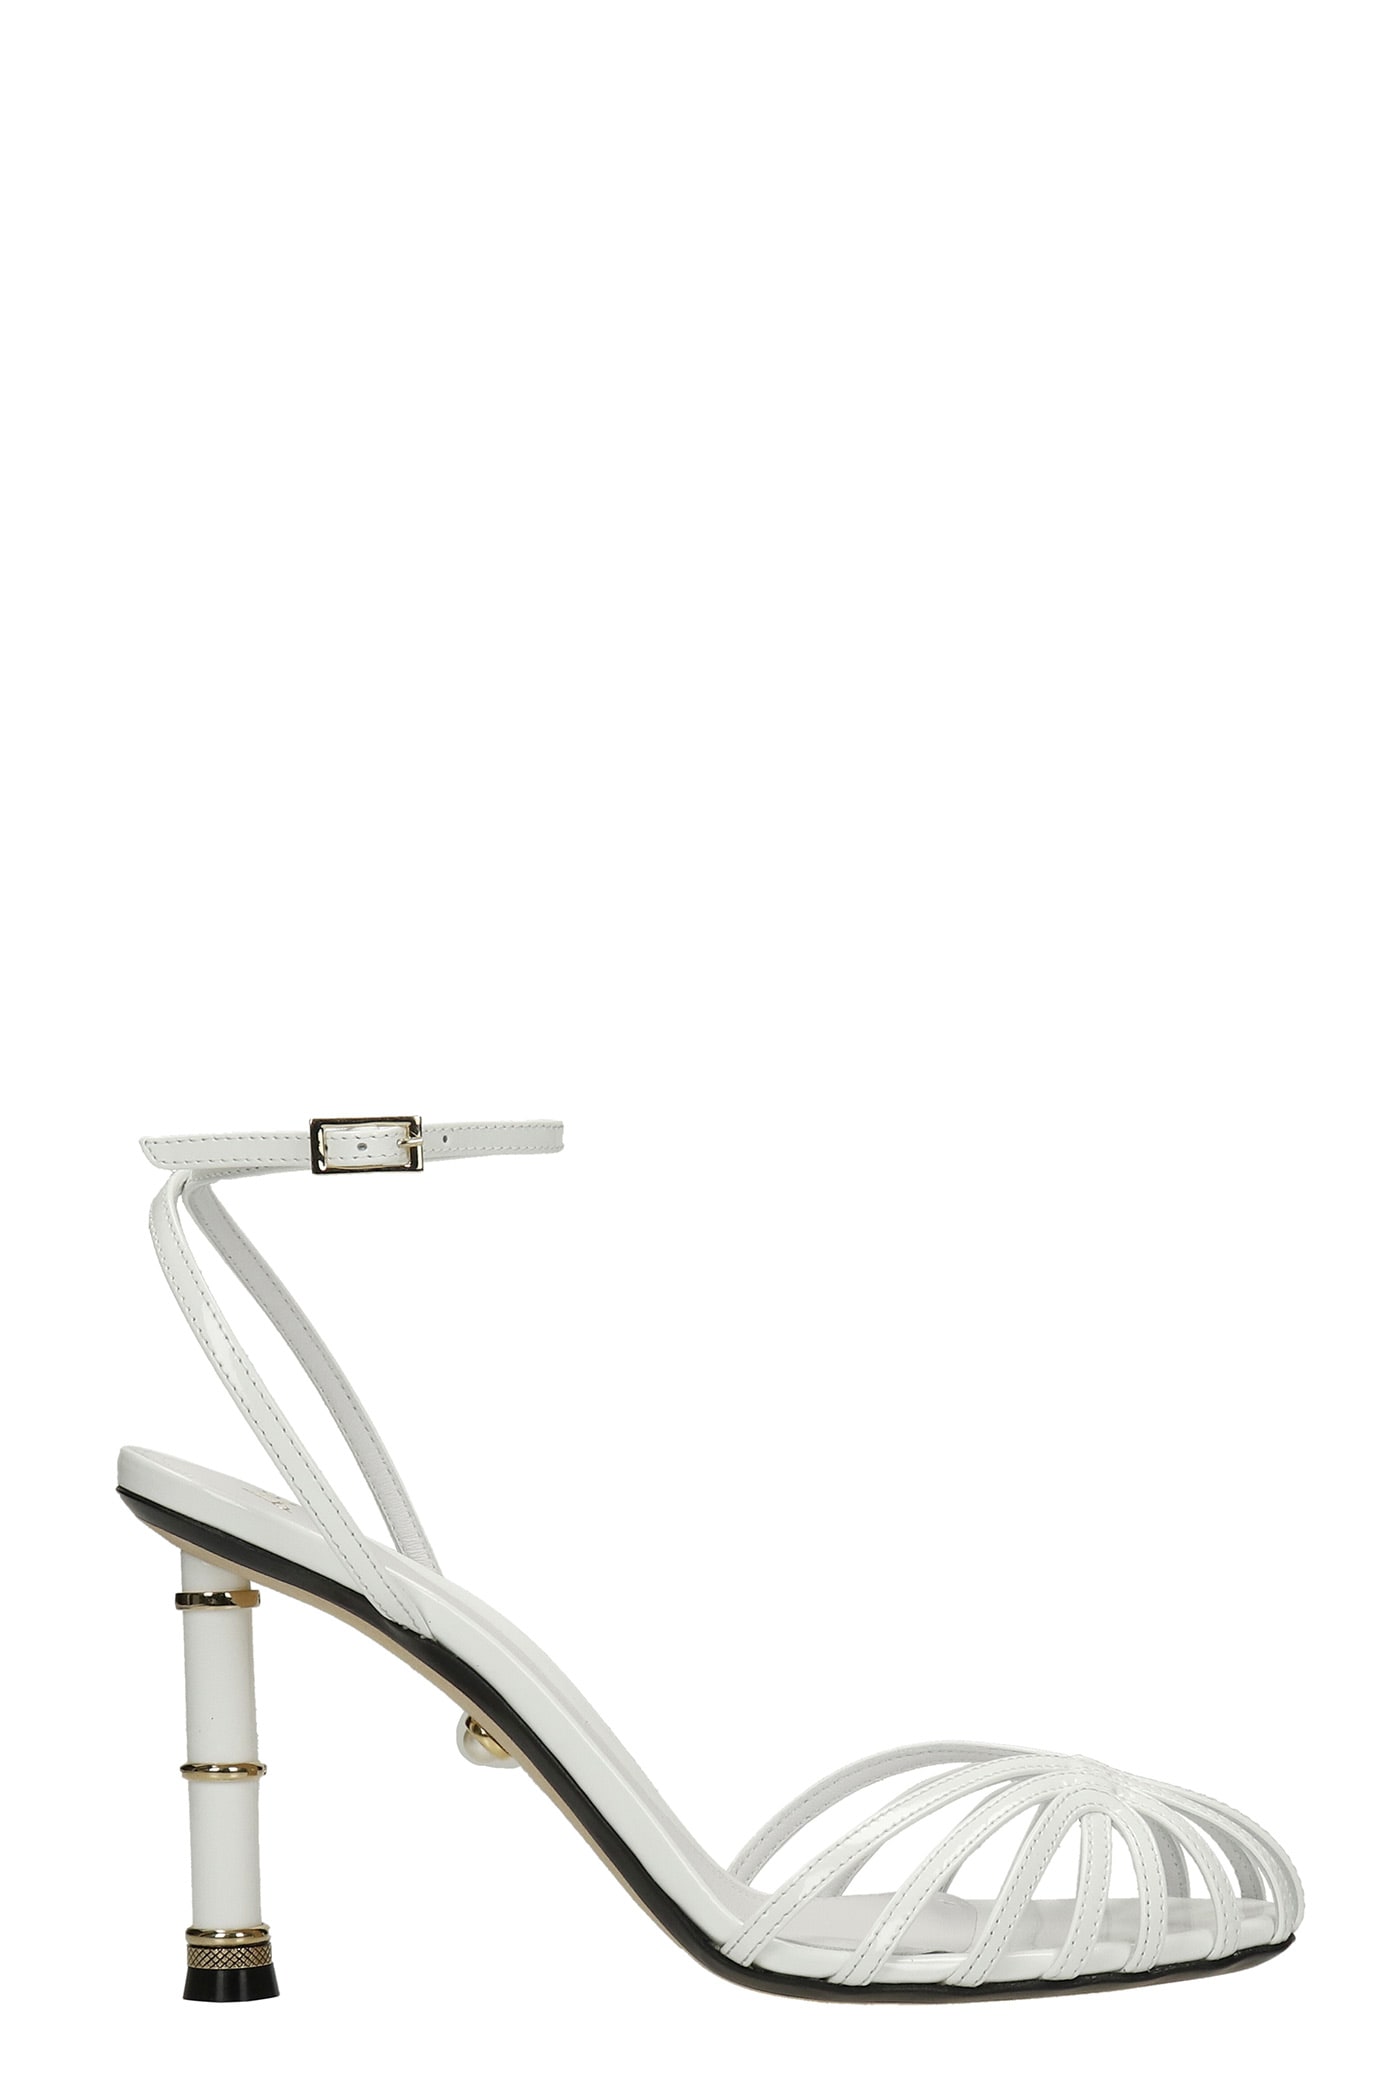 Alevì Denise 090 Sandals In White Patent Leather